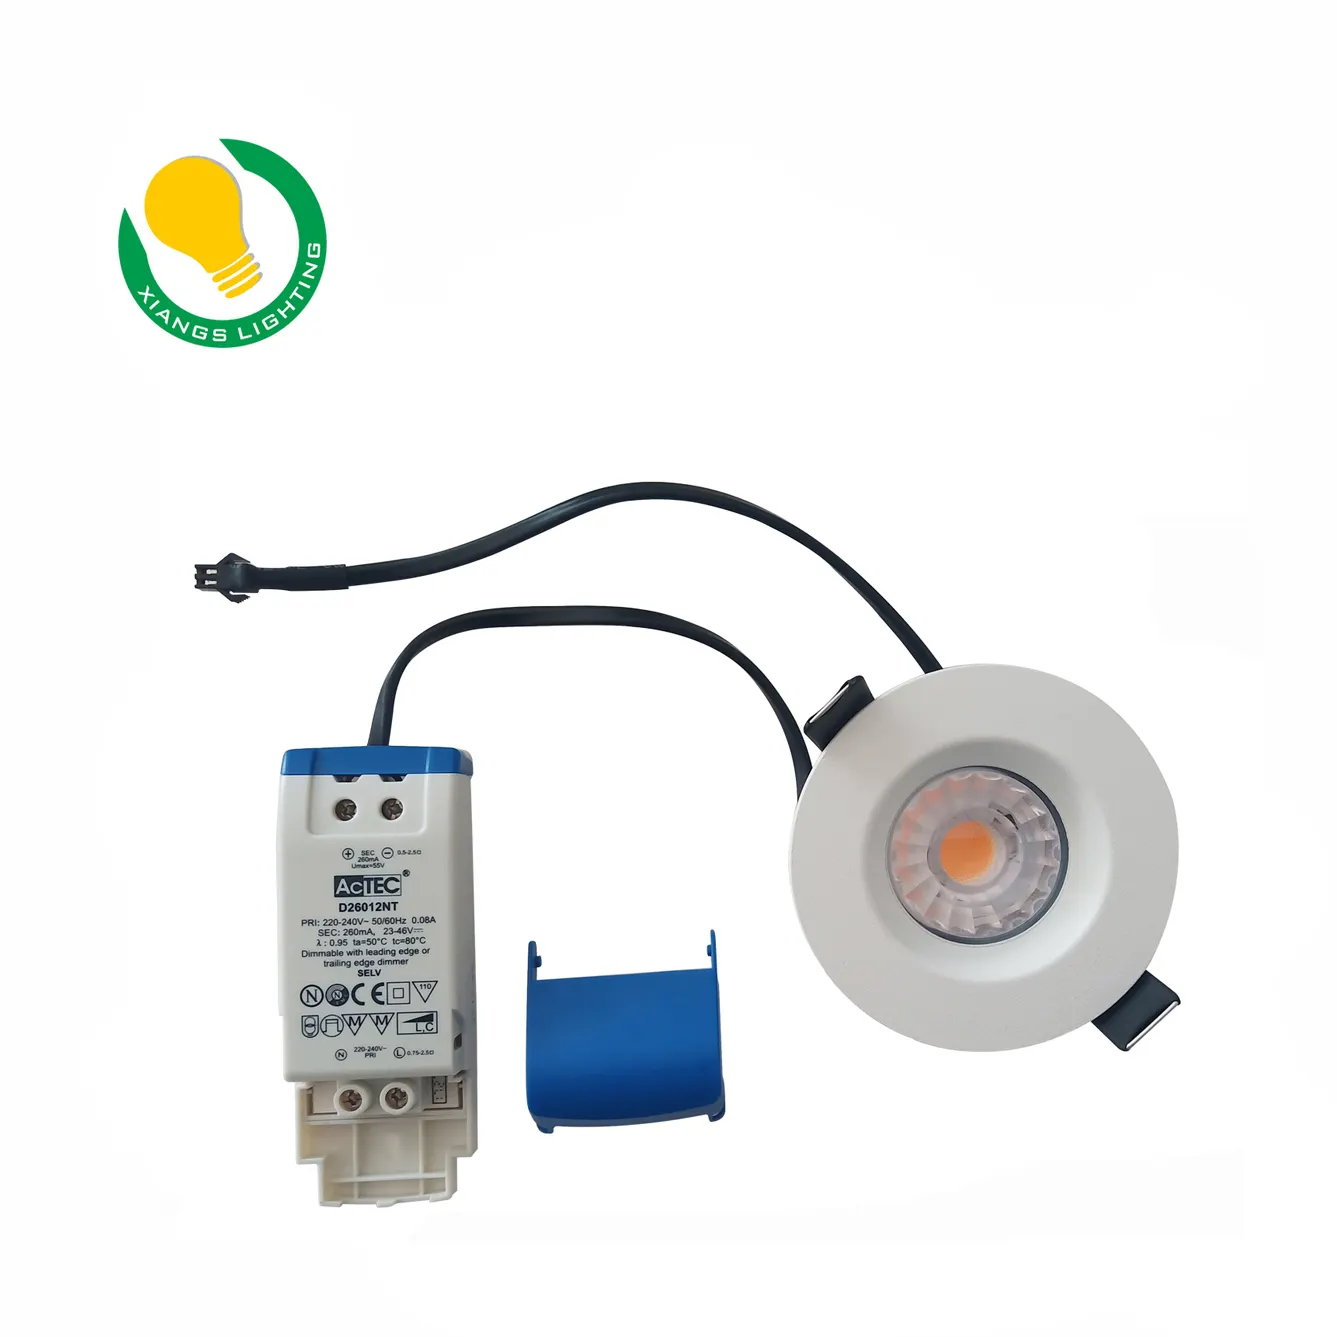 Venta caliente comercial IP65 impermeable ajustable 10W 12W 15W COB LED Downlight antideslumbrante LED Spot downlight para proyecto/Hotel